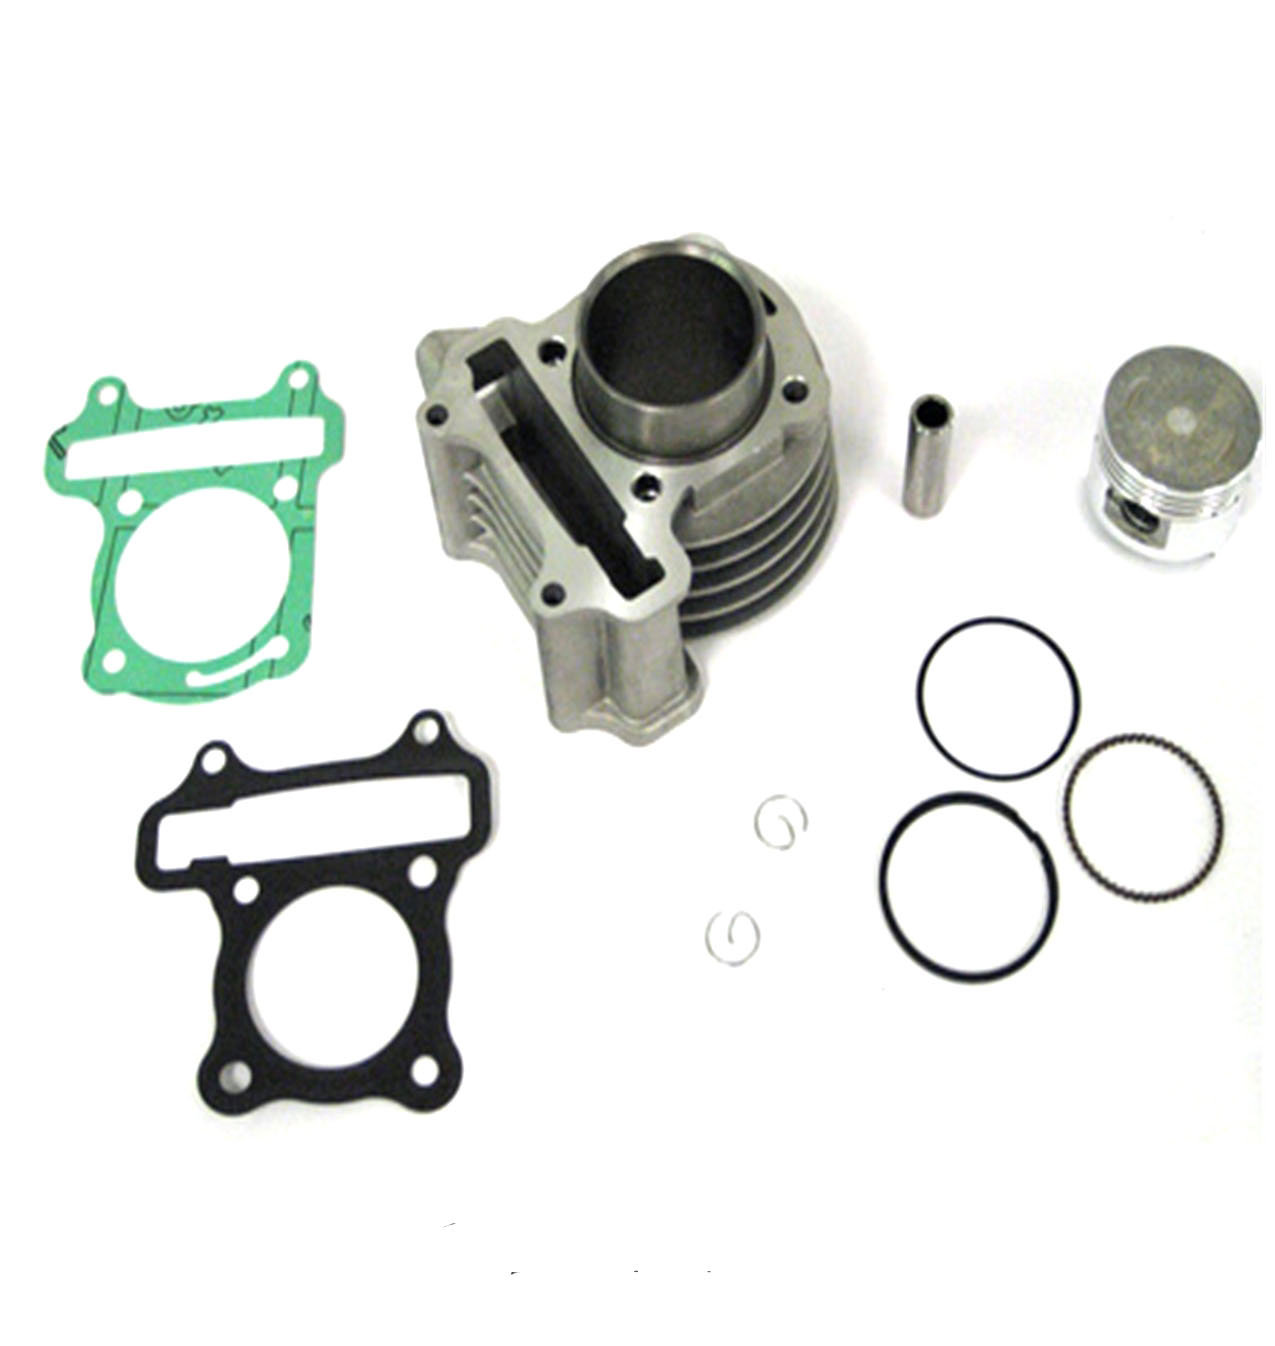 60cc (High Performance) Cylinder Piston Top End Kit For GY6-50 QMB139 Chinese Scooter Motors. Bore=44mm